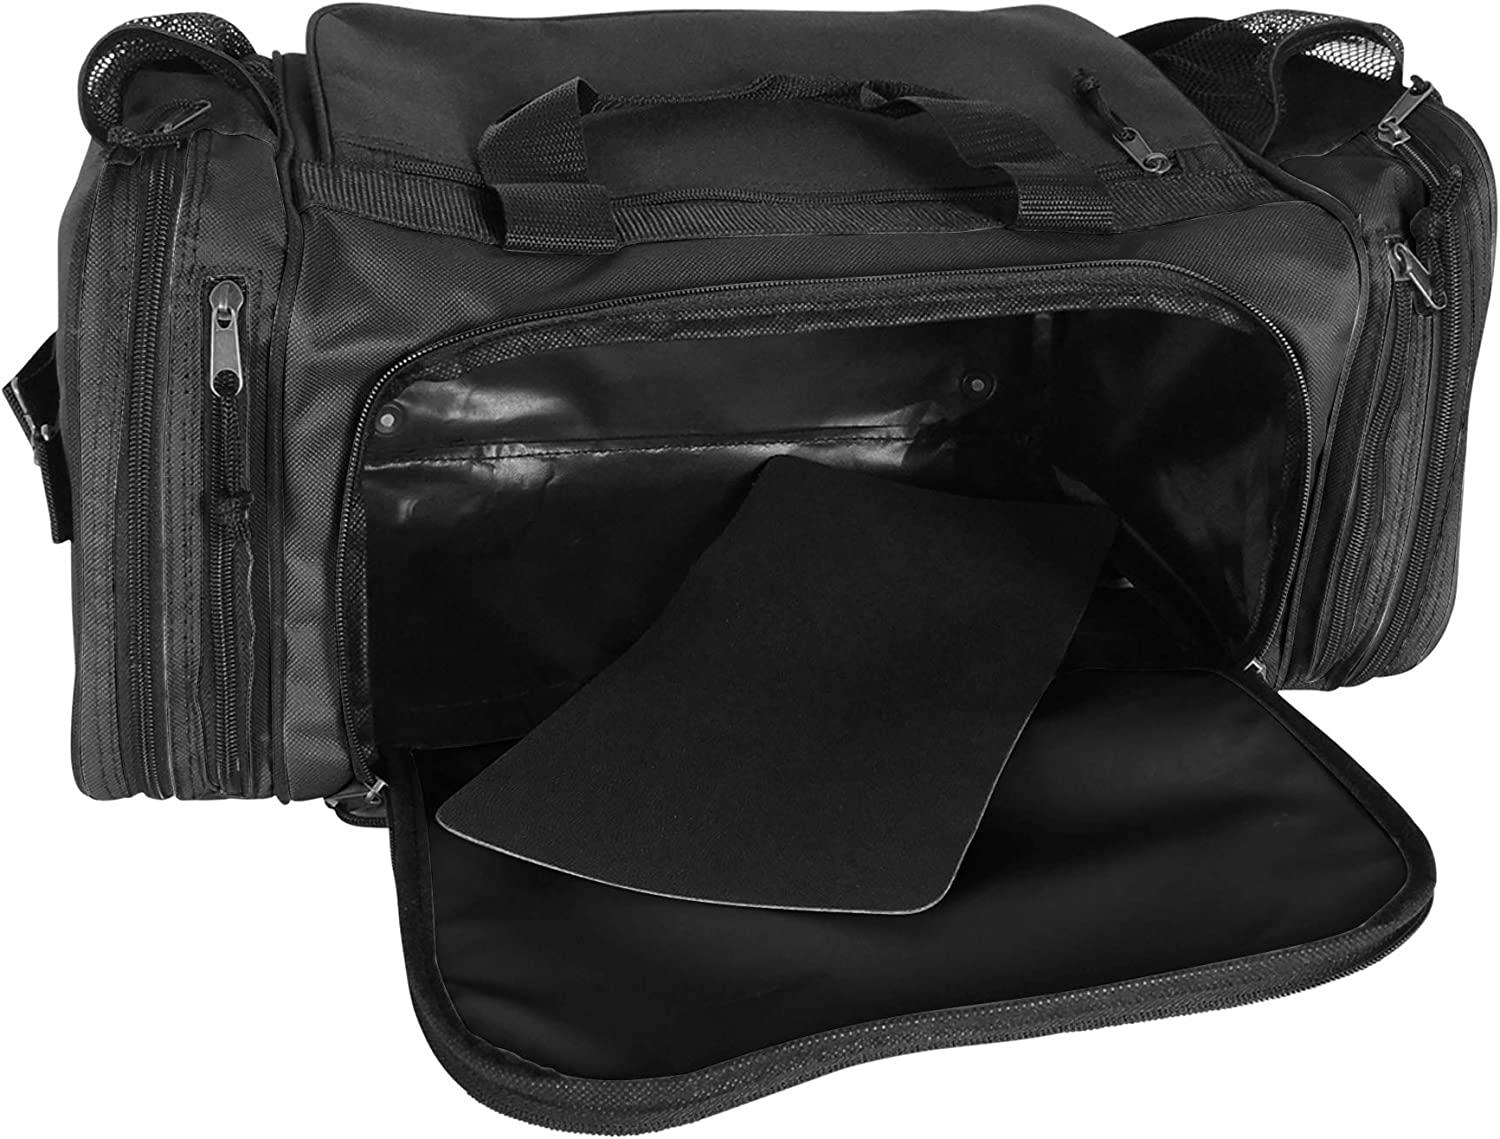 Dalix 20 Inch Sports Duffle Bag with Mesh and Valuables Pockets